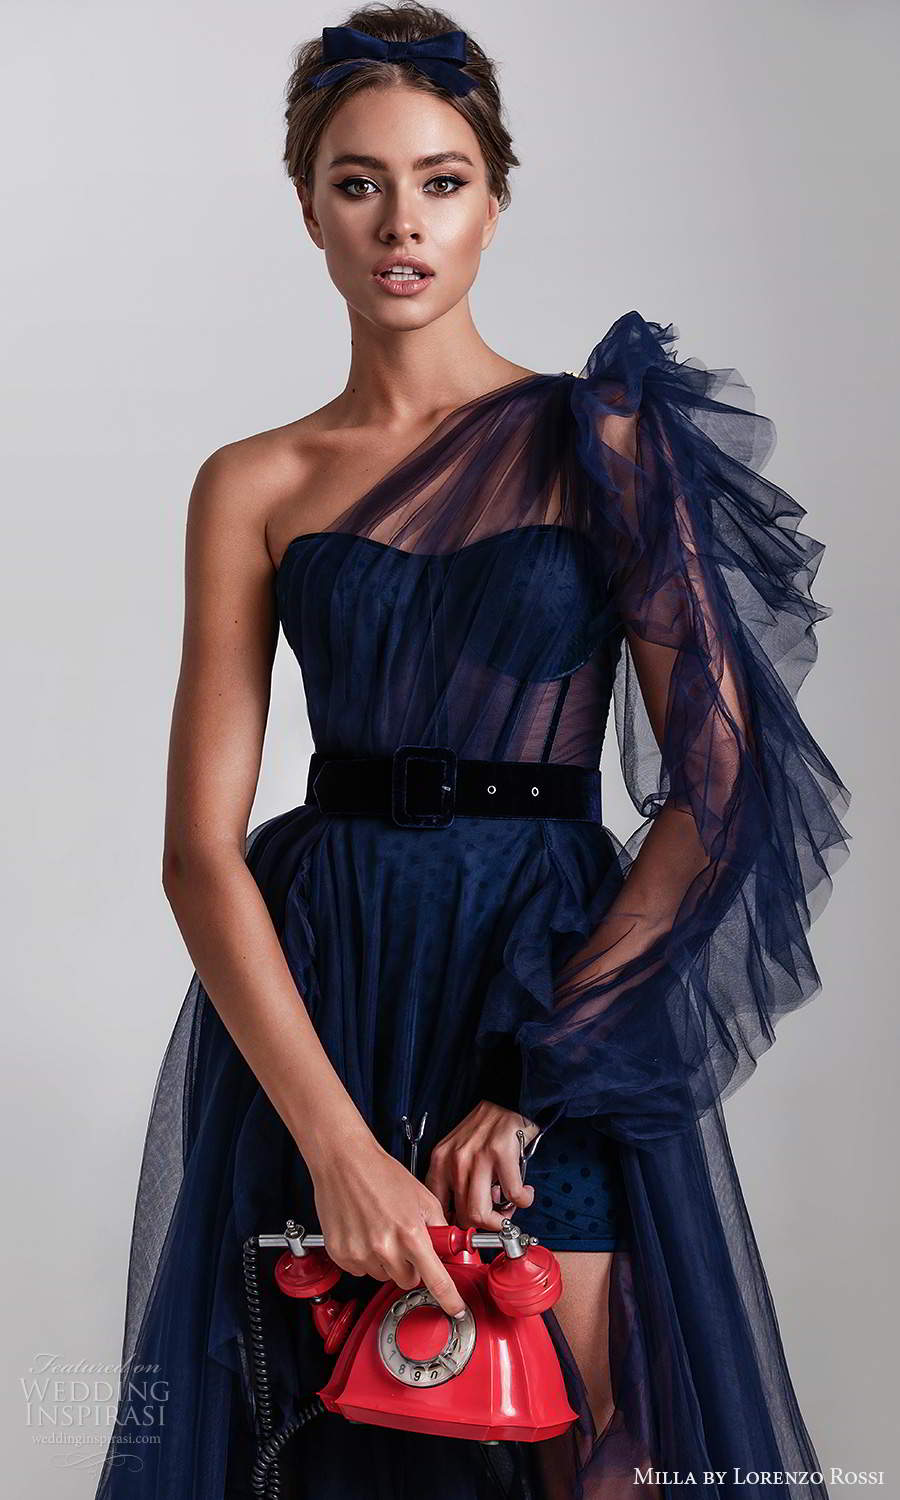 milla by lorenzo rossi 2020 rtw one shoulder semi sweetheart neckline ruched bodice a line ball gown wedding dress chapel train navy blue (8) zv